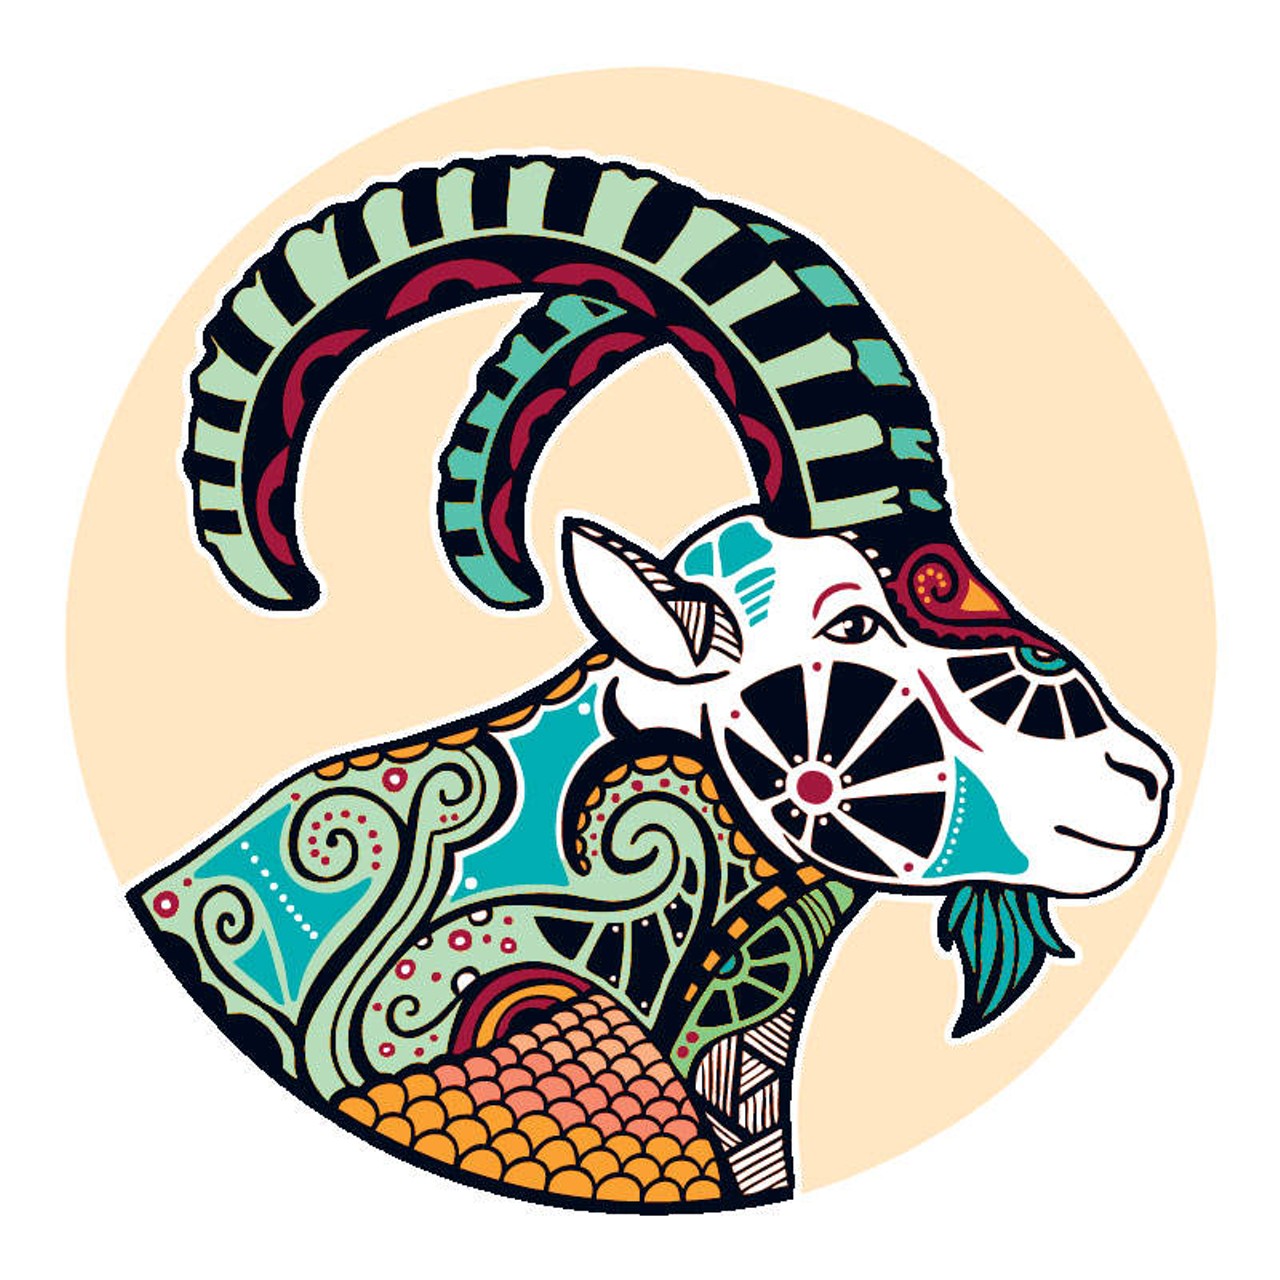 CAPRICORN (Dec. 21-Jan. 20): 
The last thing you need to do is worry about how this is all going to work out. Do yourself a favor and give it a rest. If you&#146;ve had enough faith to let this come true in its own good time, all I can say is keep up the good work. The need to convert, correct, or cooperate is showing up in your relationships and in your daily experience to such an extent that you&#146;re feeling the stress of what it means to do it all. When life gets this tense, you&#146;ve got to be able to wait things out and disengage from your perfection trips just enough to remember that even this is absolutely perfect.